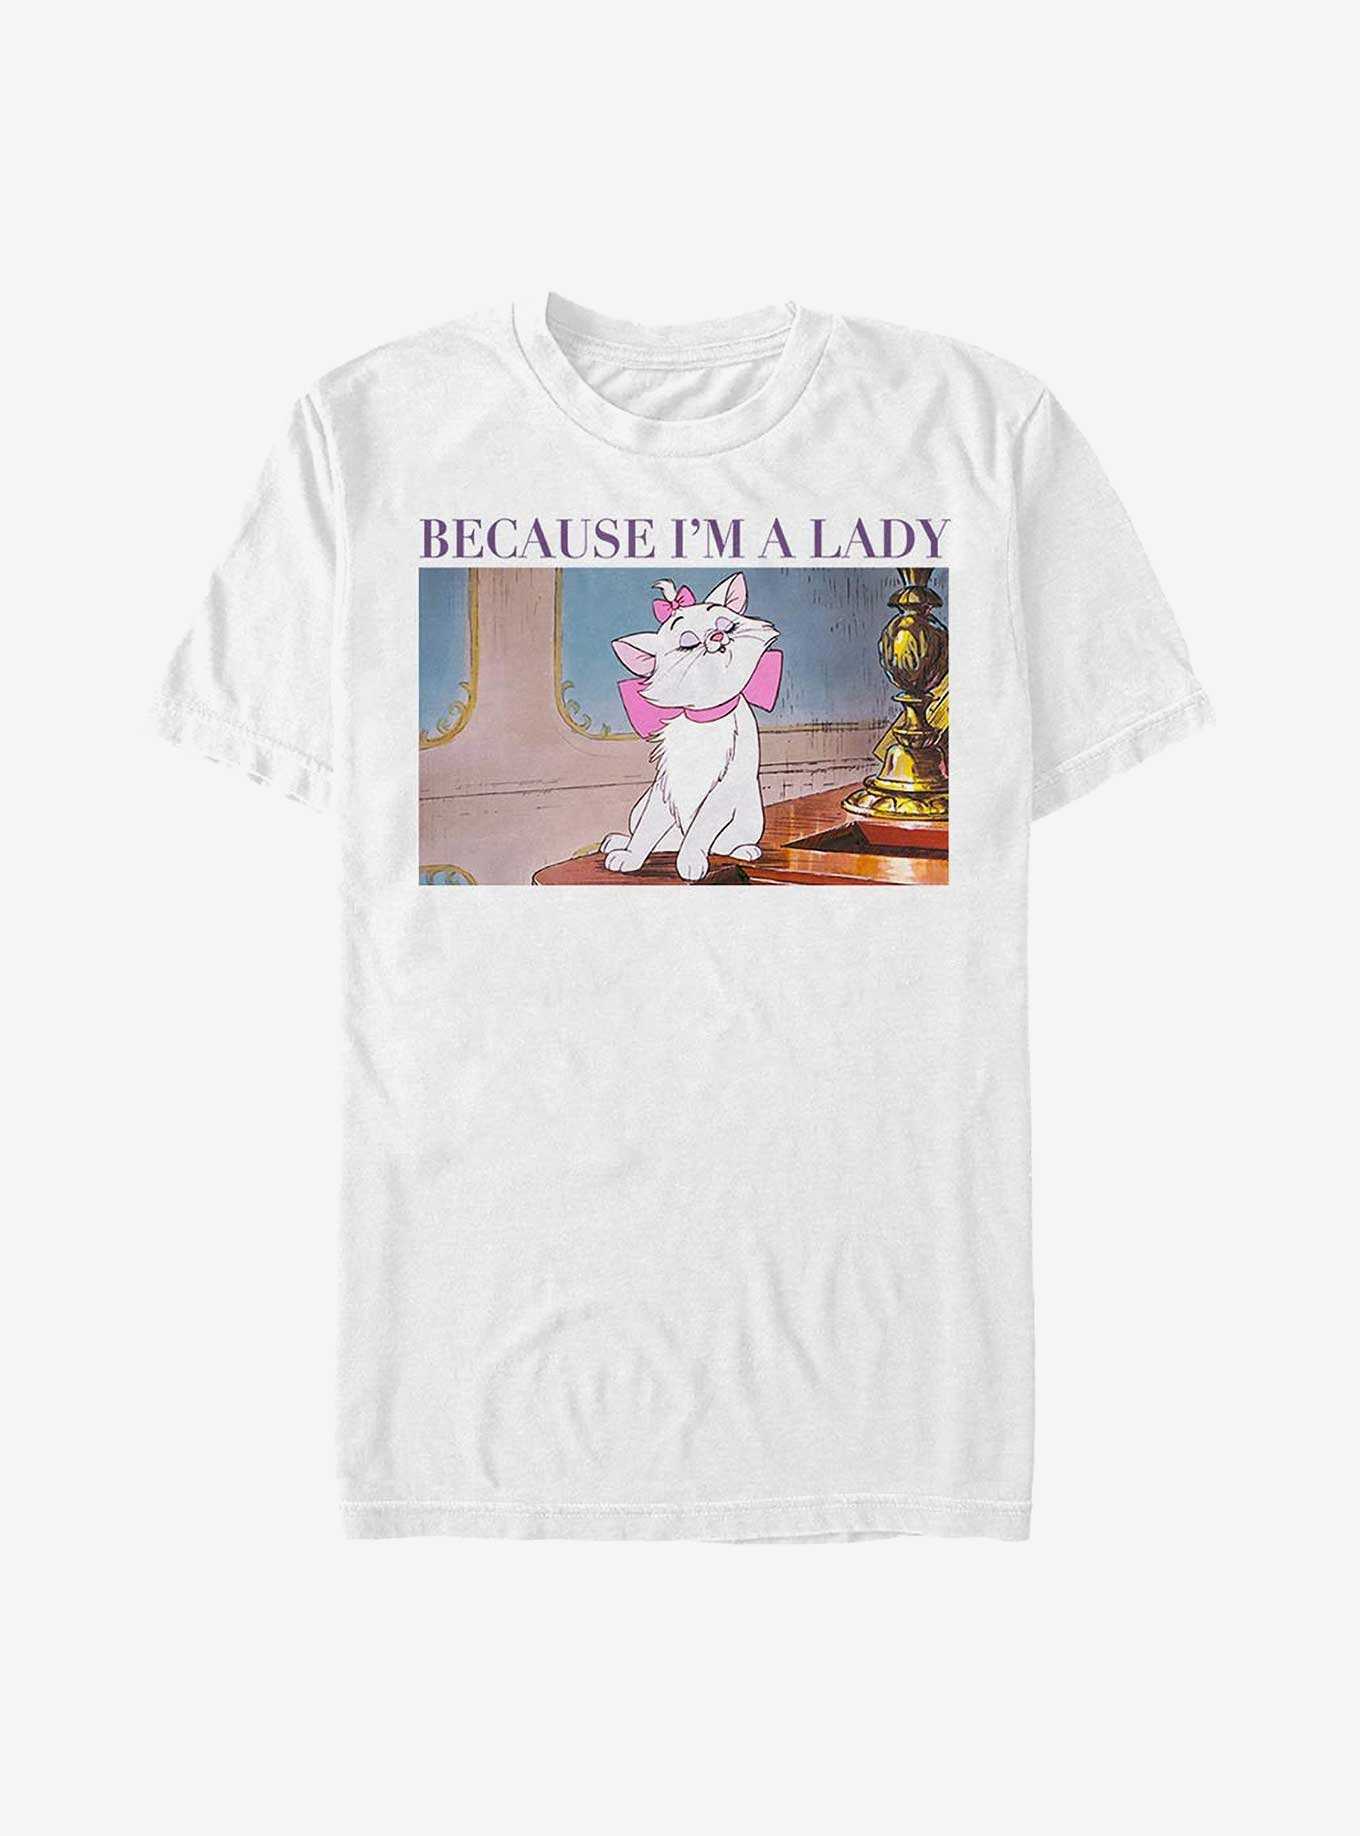 Aristocats | Shirts Plushies, OFFICIAL & Topic Hot Merch